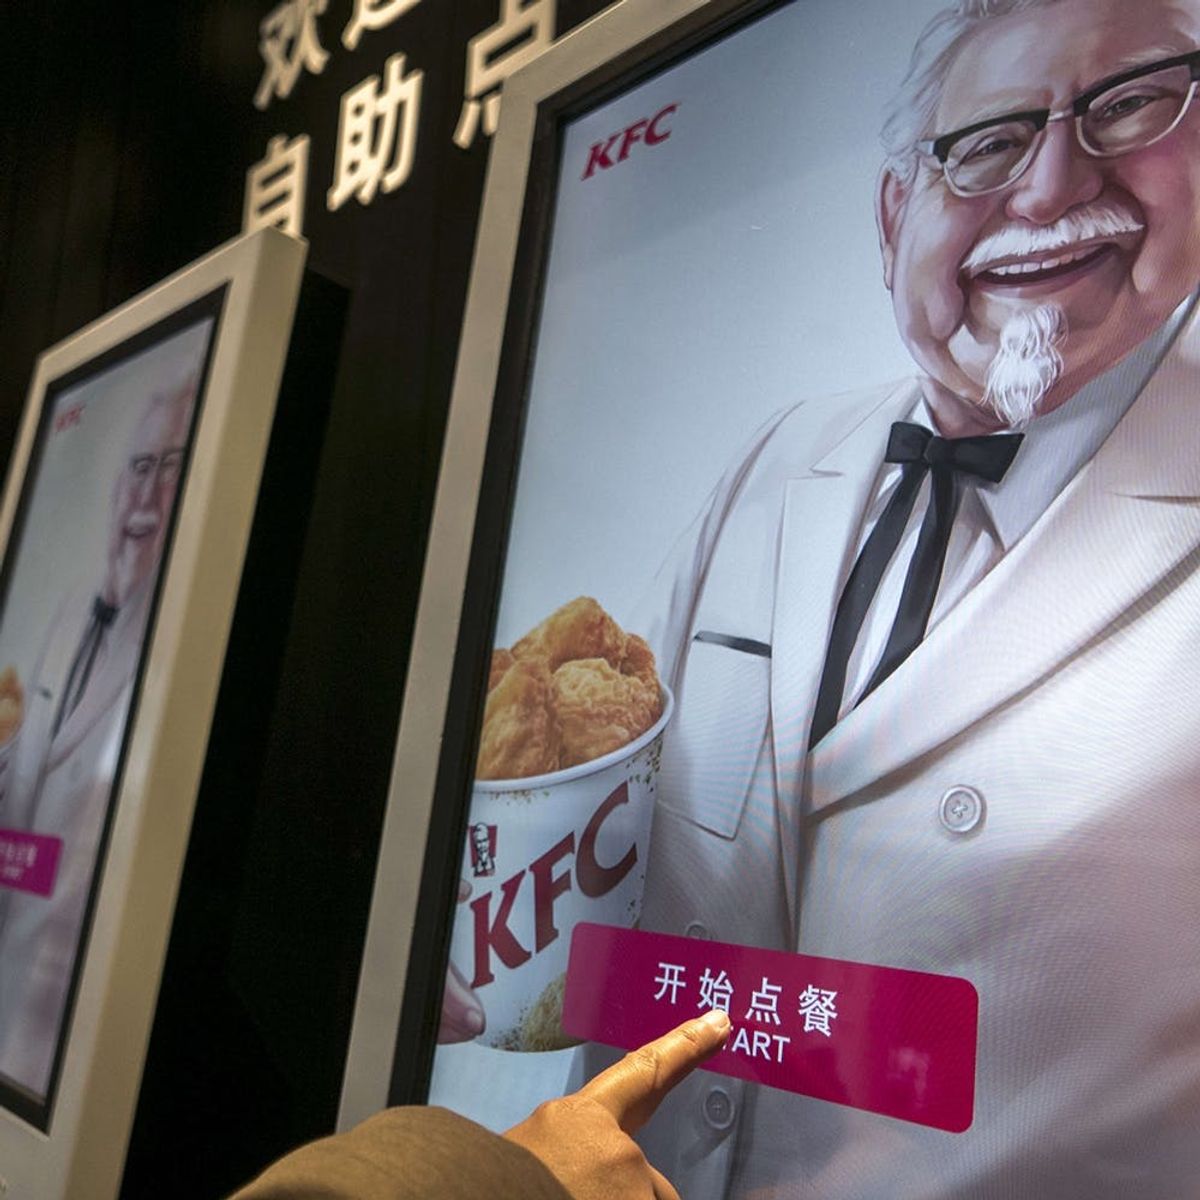 KFC Will Scan Your Face and Tell You What to Order